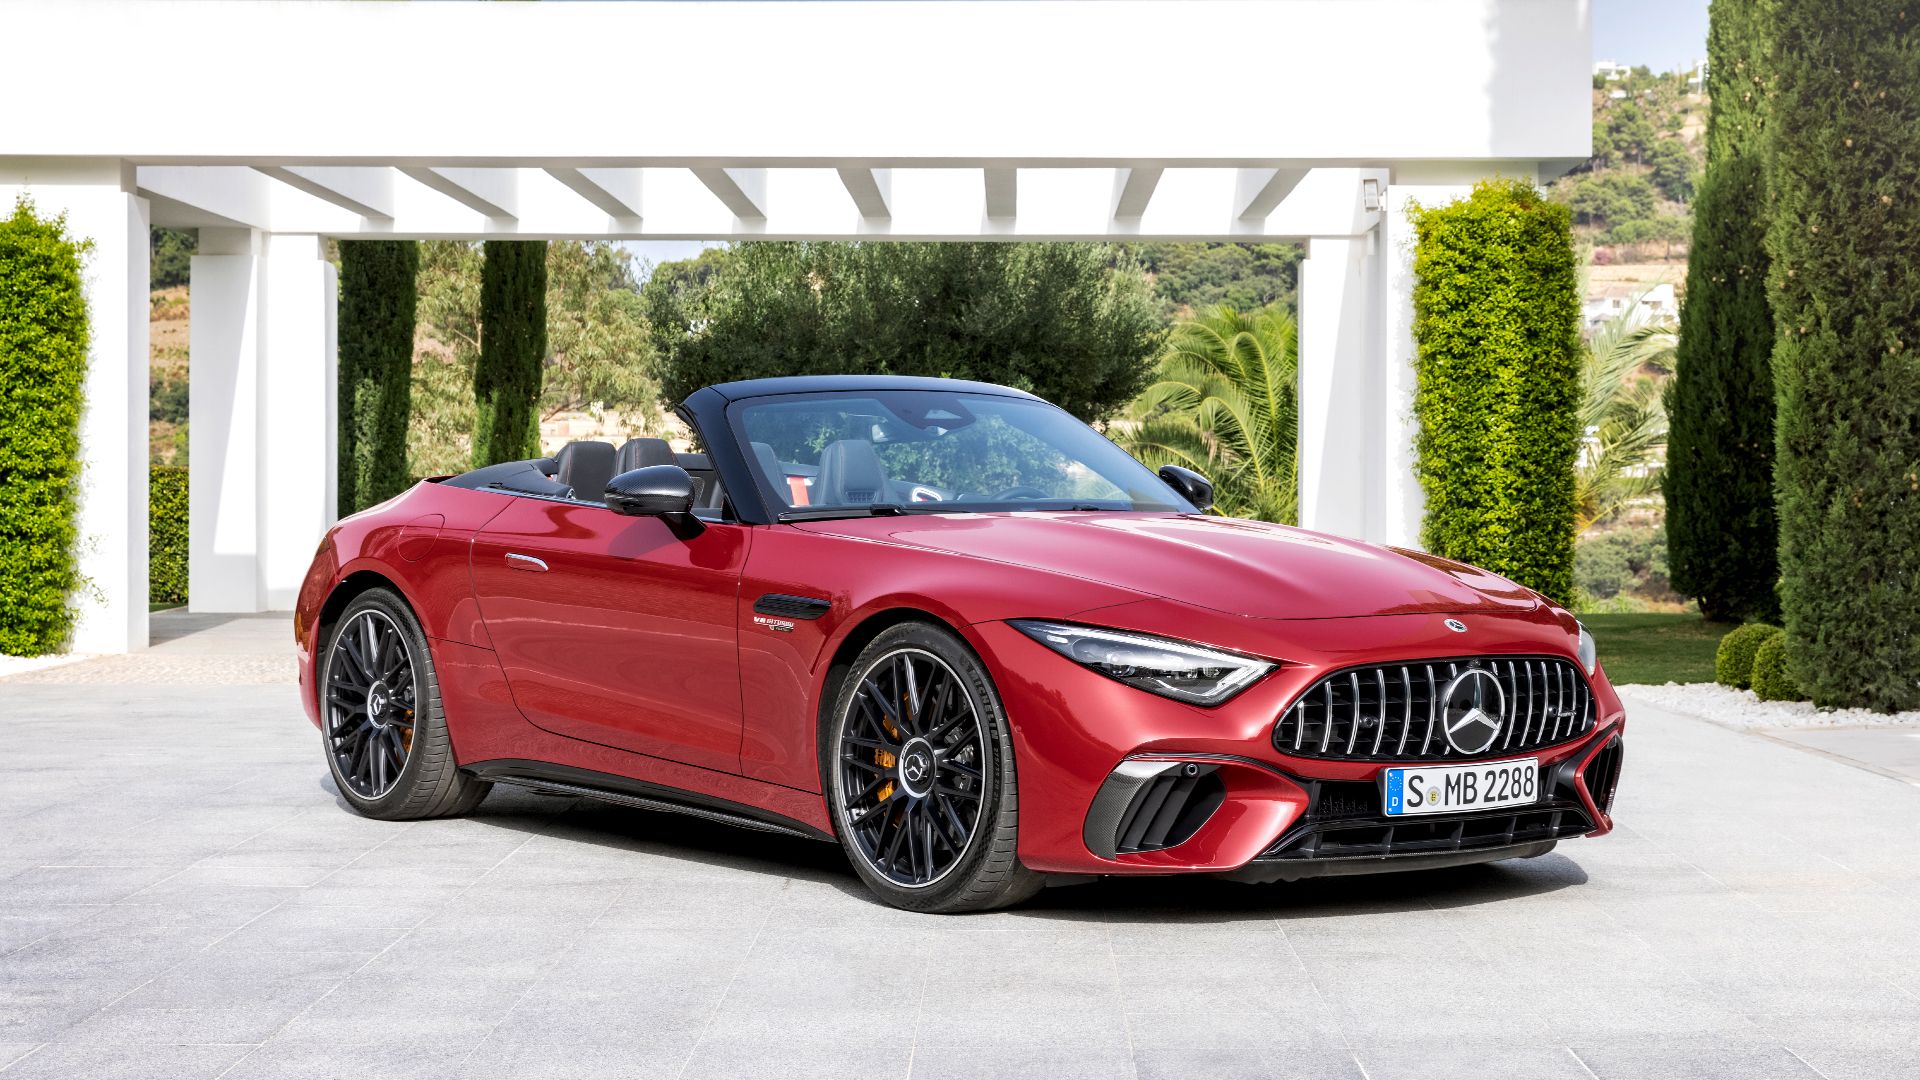 10 Things Every Gearhead Should Know About The MercedesAMG SL Roadster